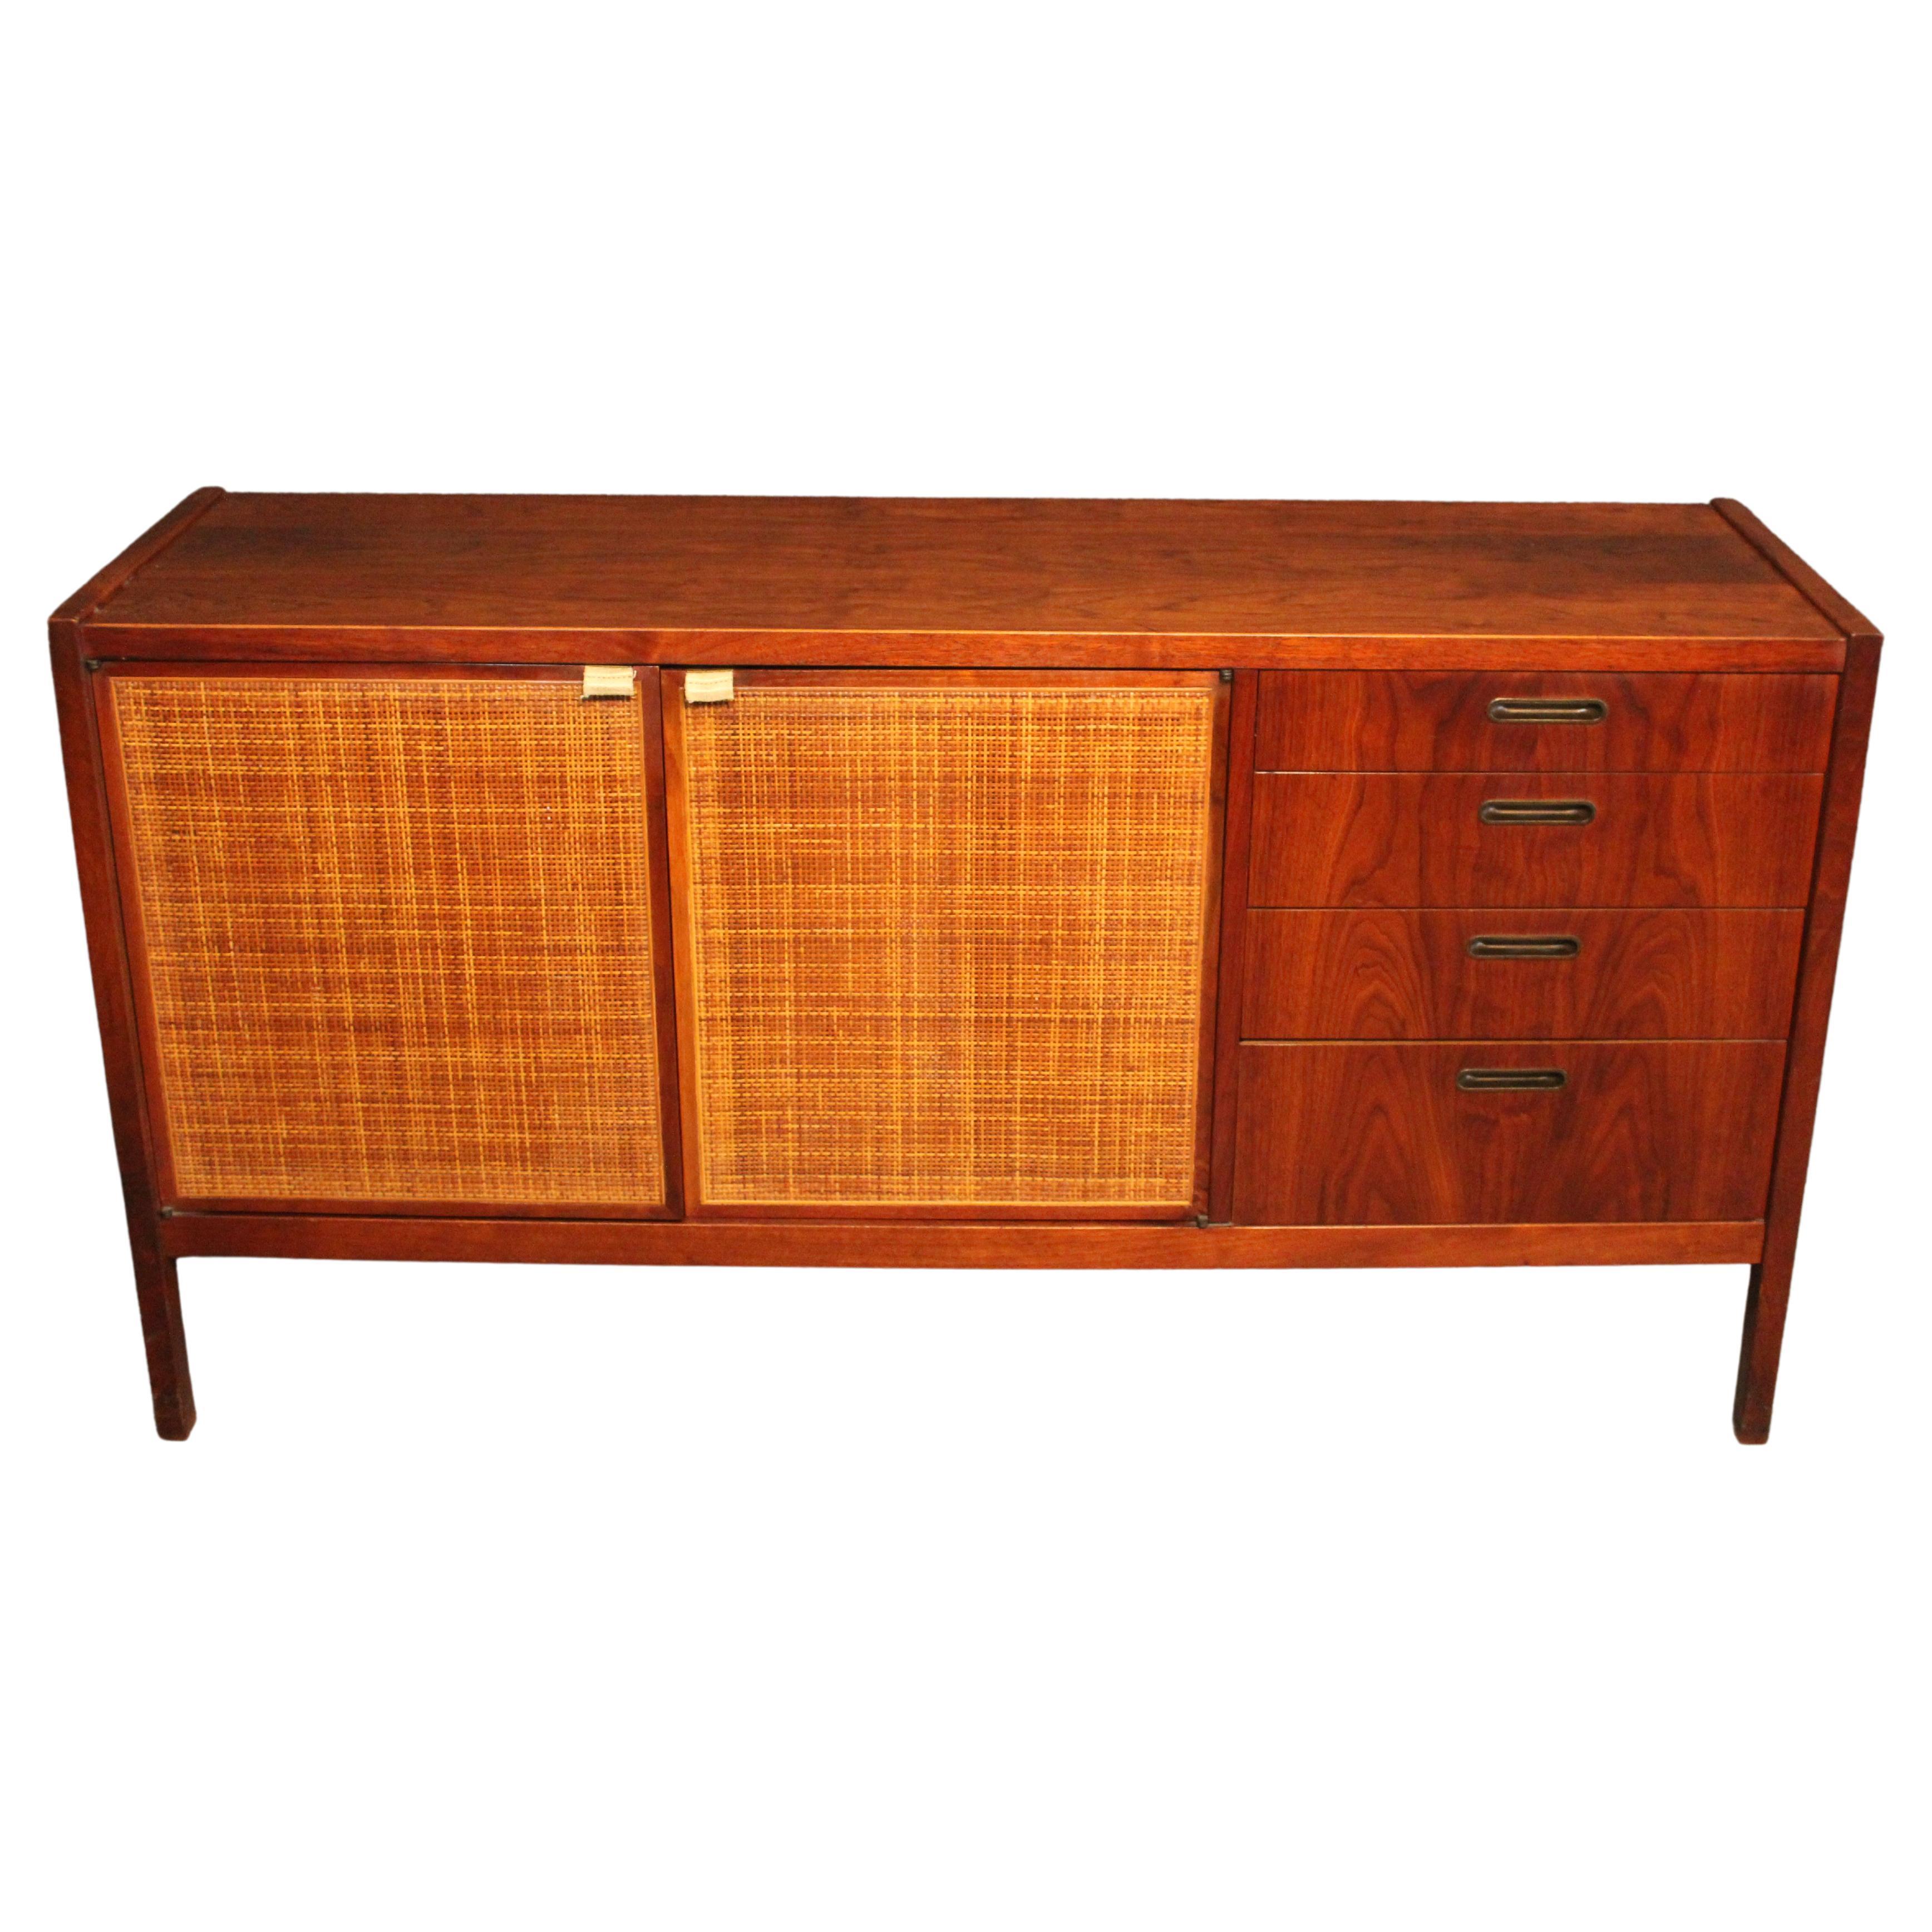 Jack Cartwright Caned Door Sideboard by Founders For Sale